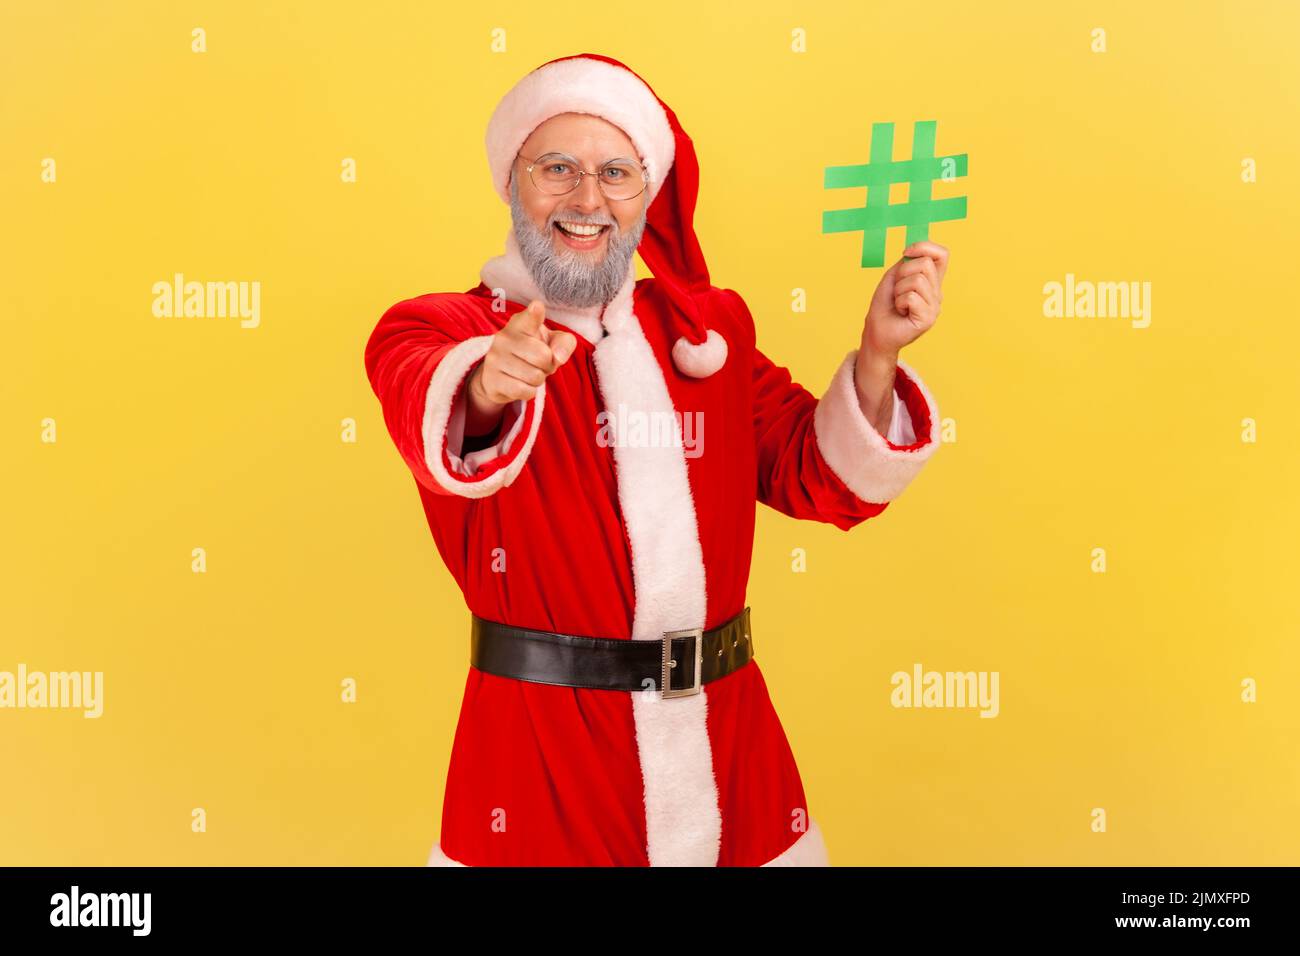 Positive elderly man with gray beard wearing santa claus costume standing with green hashtag in hands, pointing to camera with toothy smile. Indoor studio shot isolated on yellow background. Stock Photo